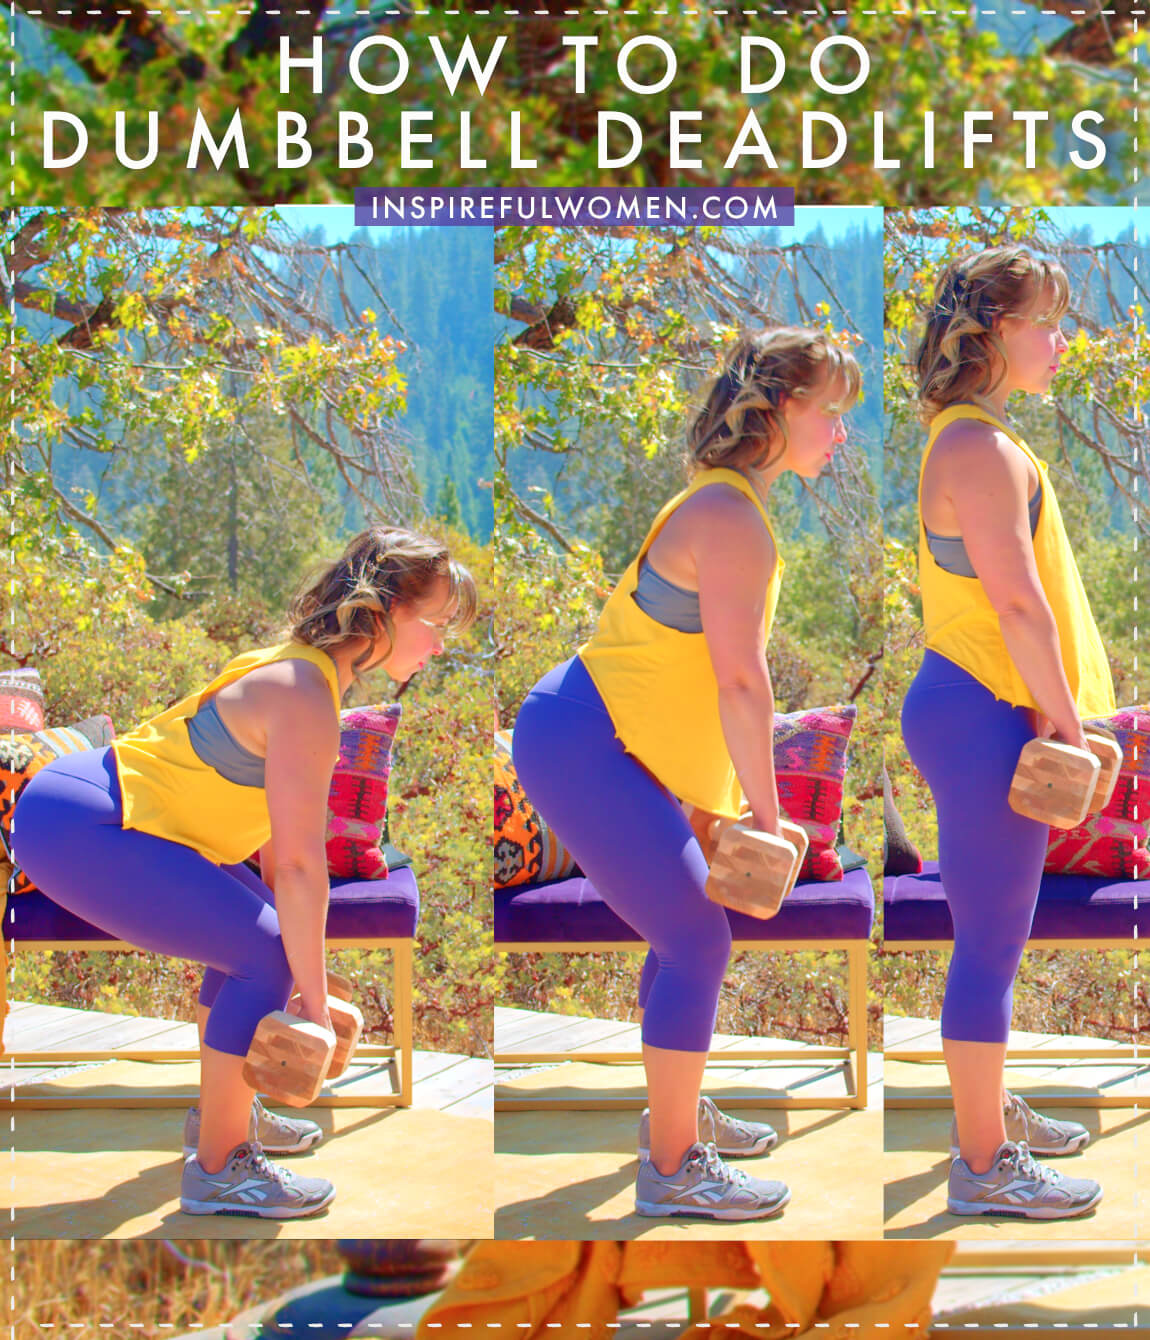 how-to-dumbbell-deadlift-posterior-chain-exercise-at-home-proper-form-for-women-40+